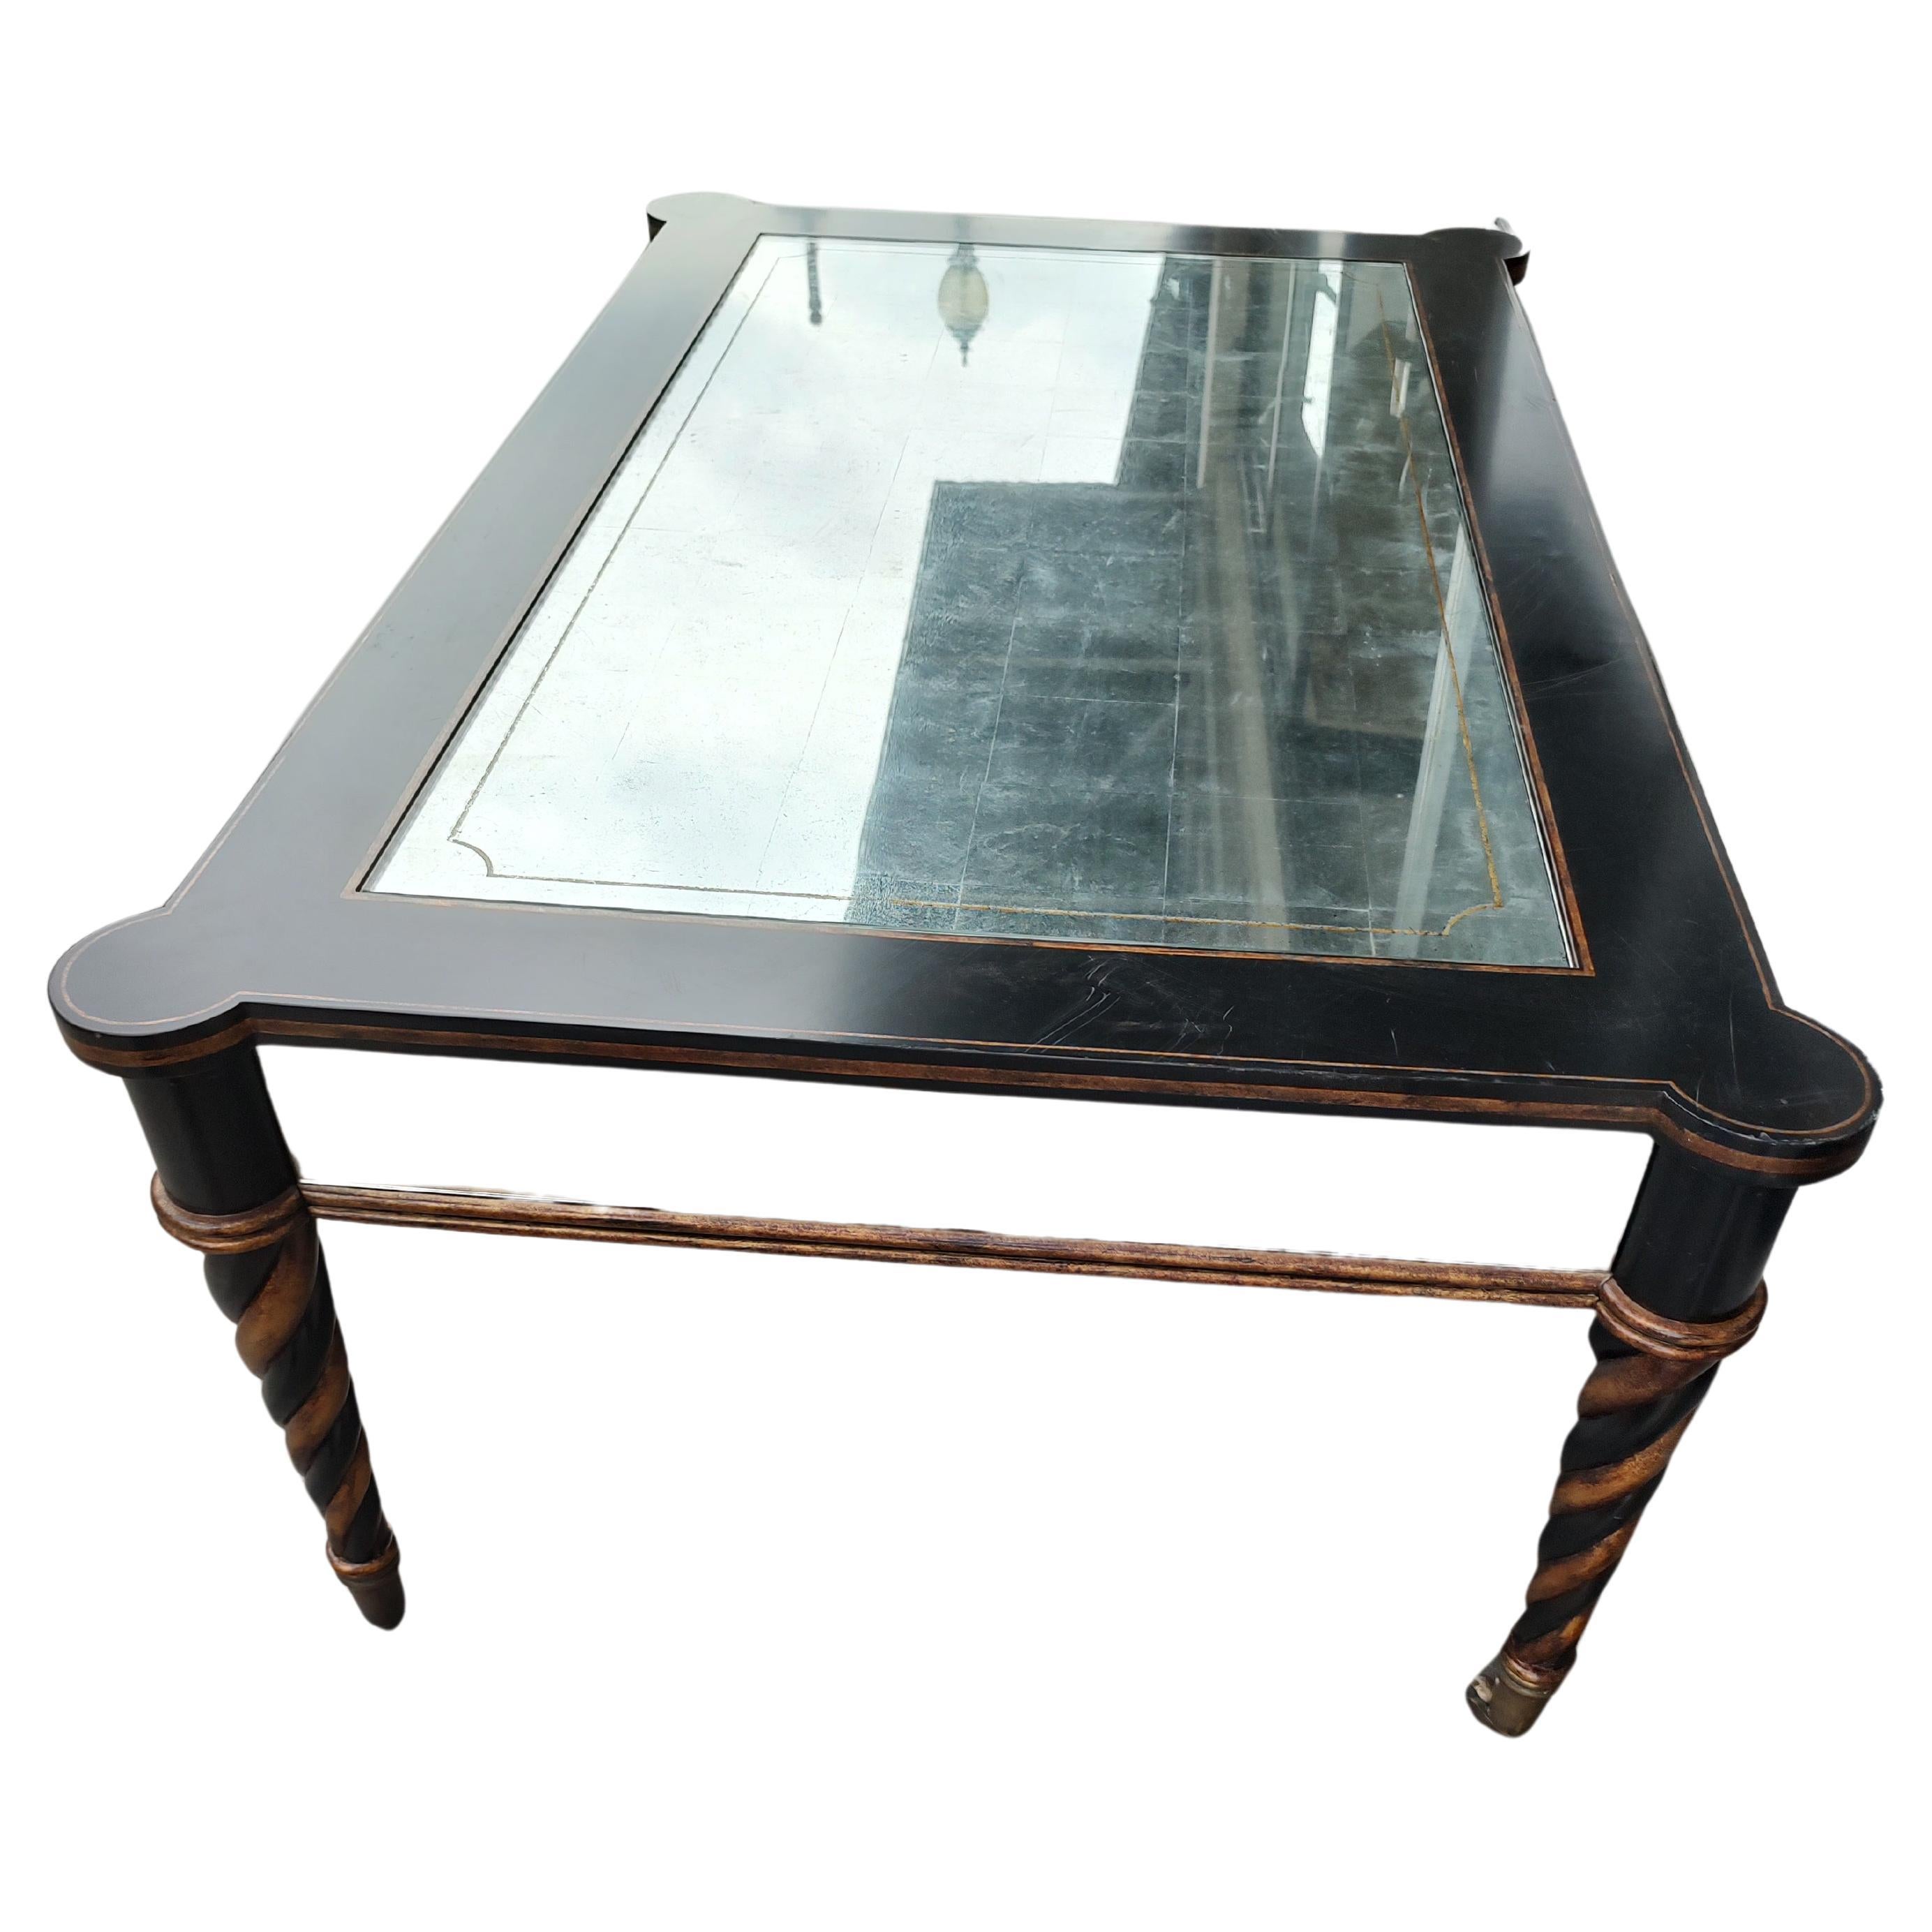 Neoclassical Sheraton Style Cocktail Table with Eglomise Mirrored Panels For Sale